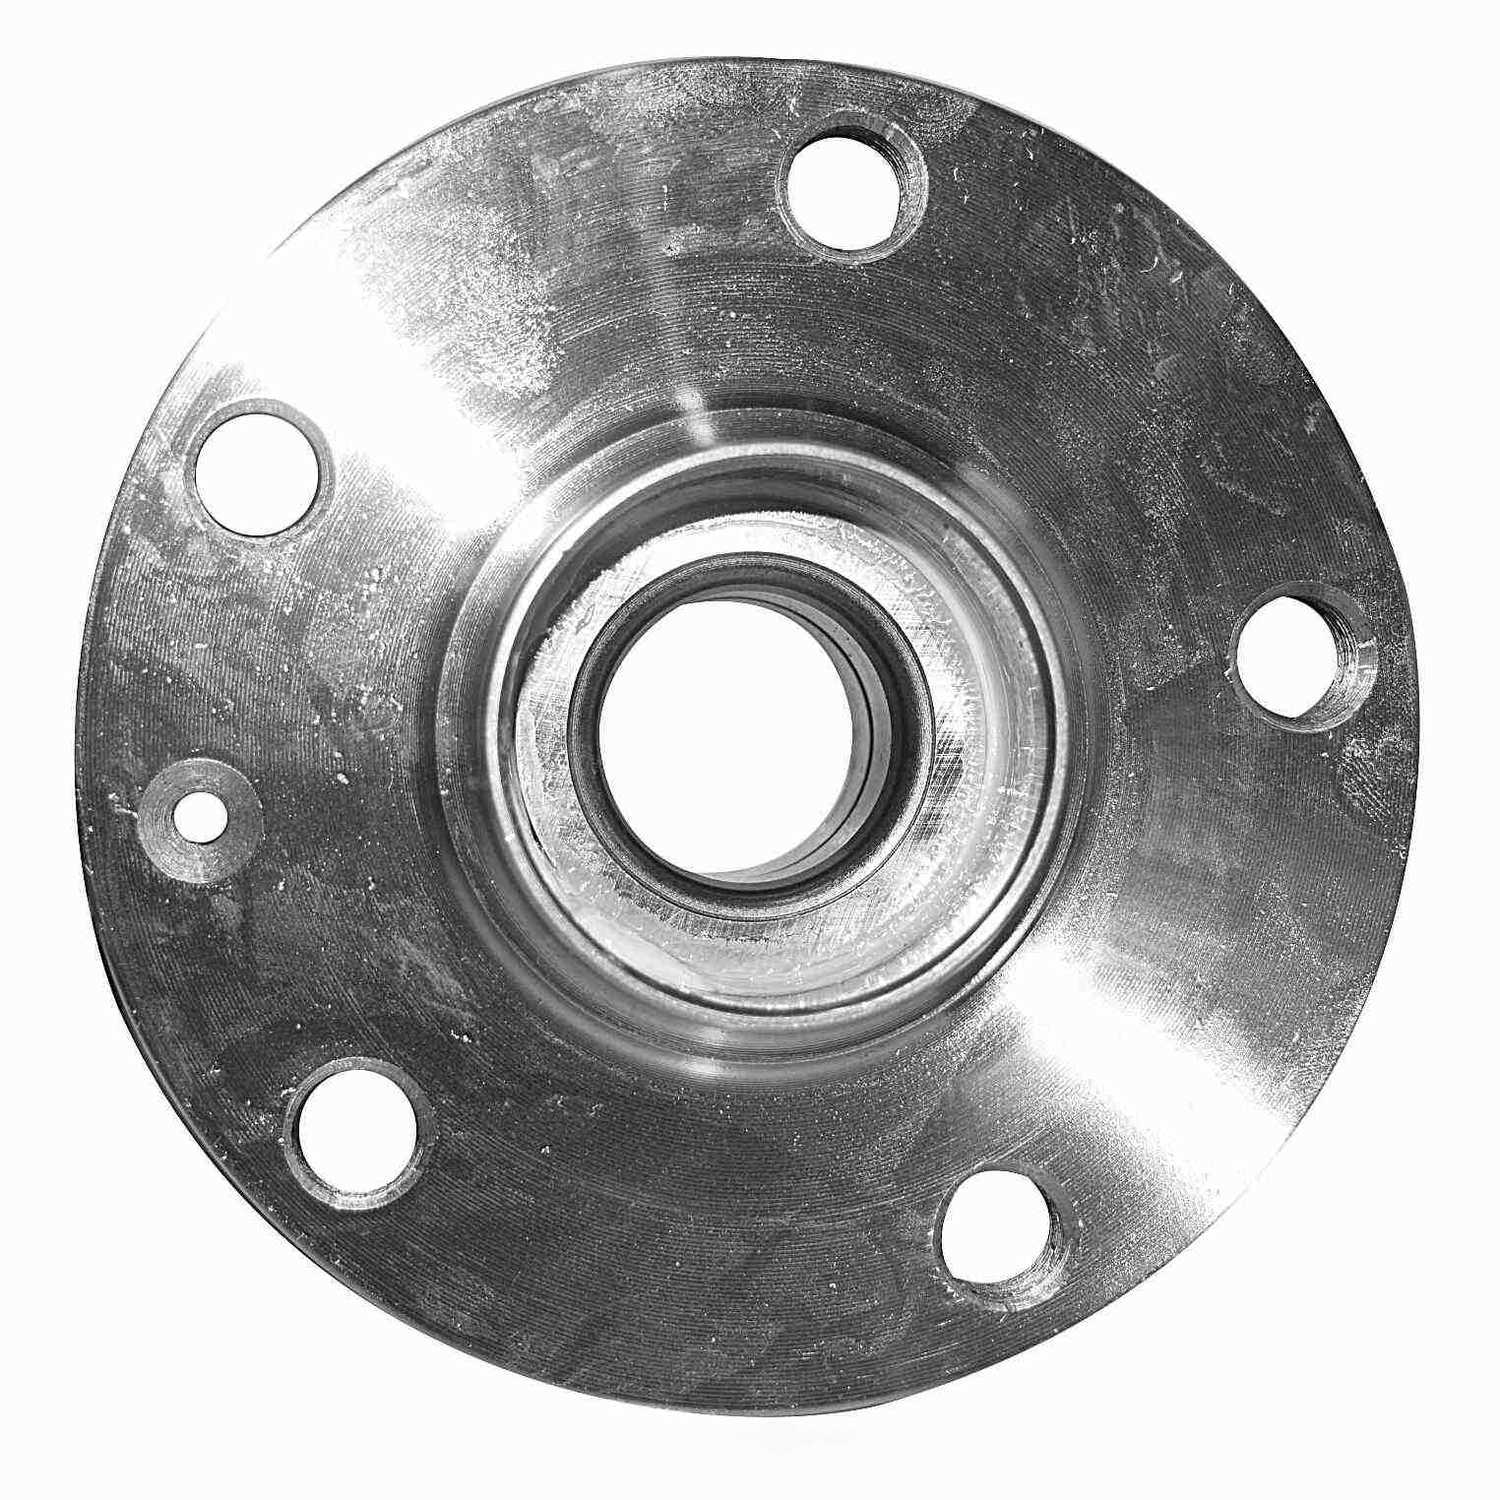 GSP NORTH AMERICA INC. - GSP Axle Bearing & Hub Assembly - AD8 233336